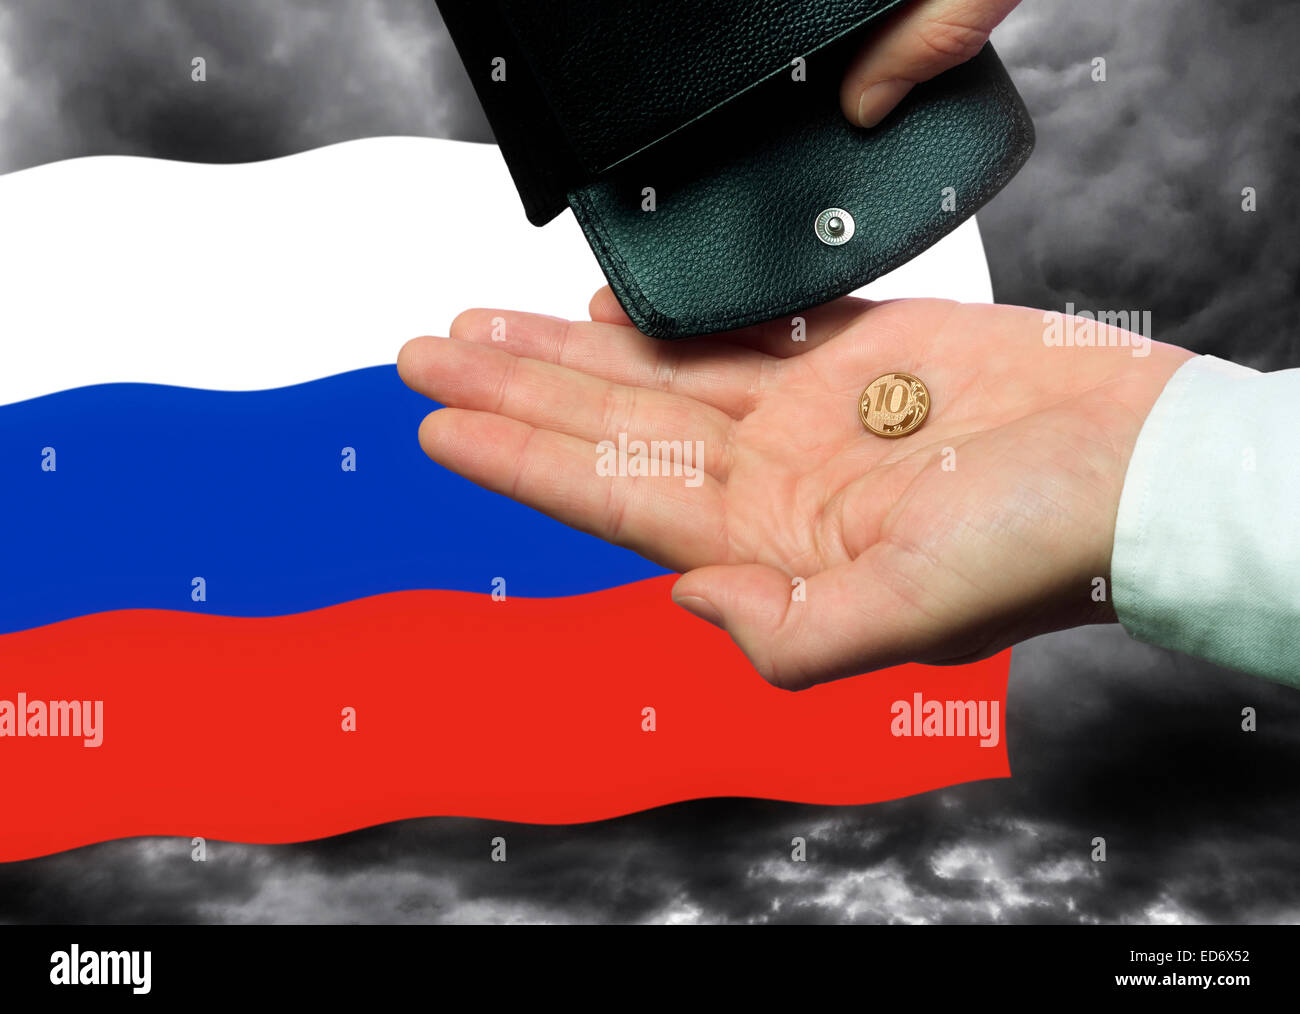 Hand with a ruble coin, Russian flag and purse in front of a dark sky. Stock Photo